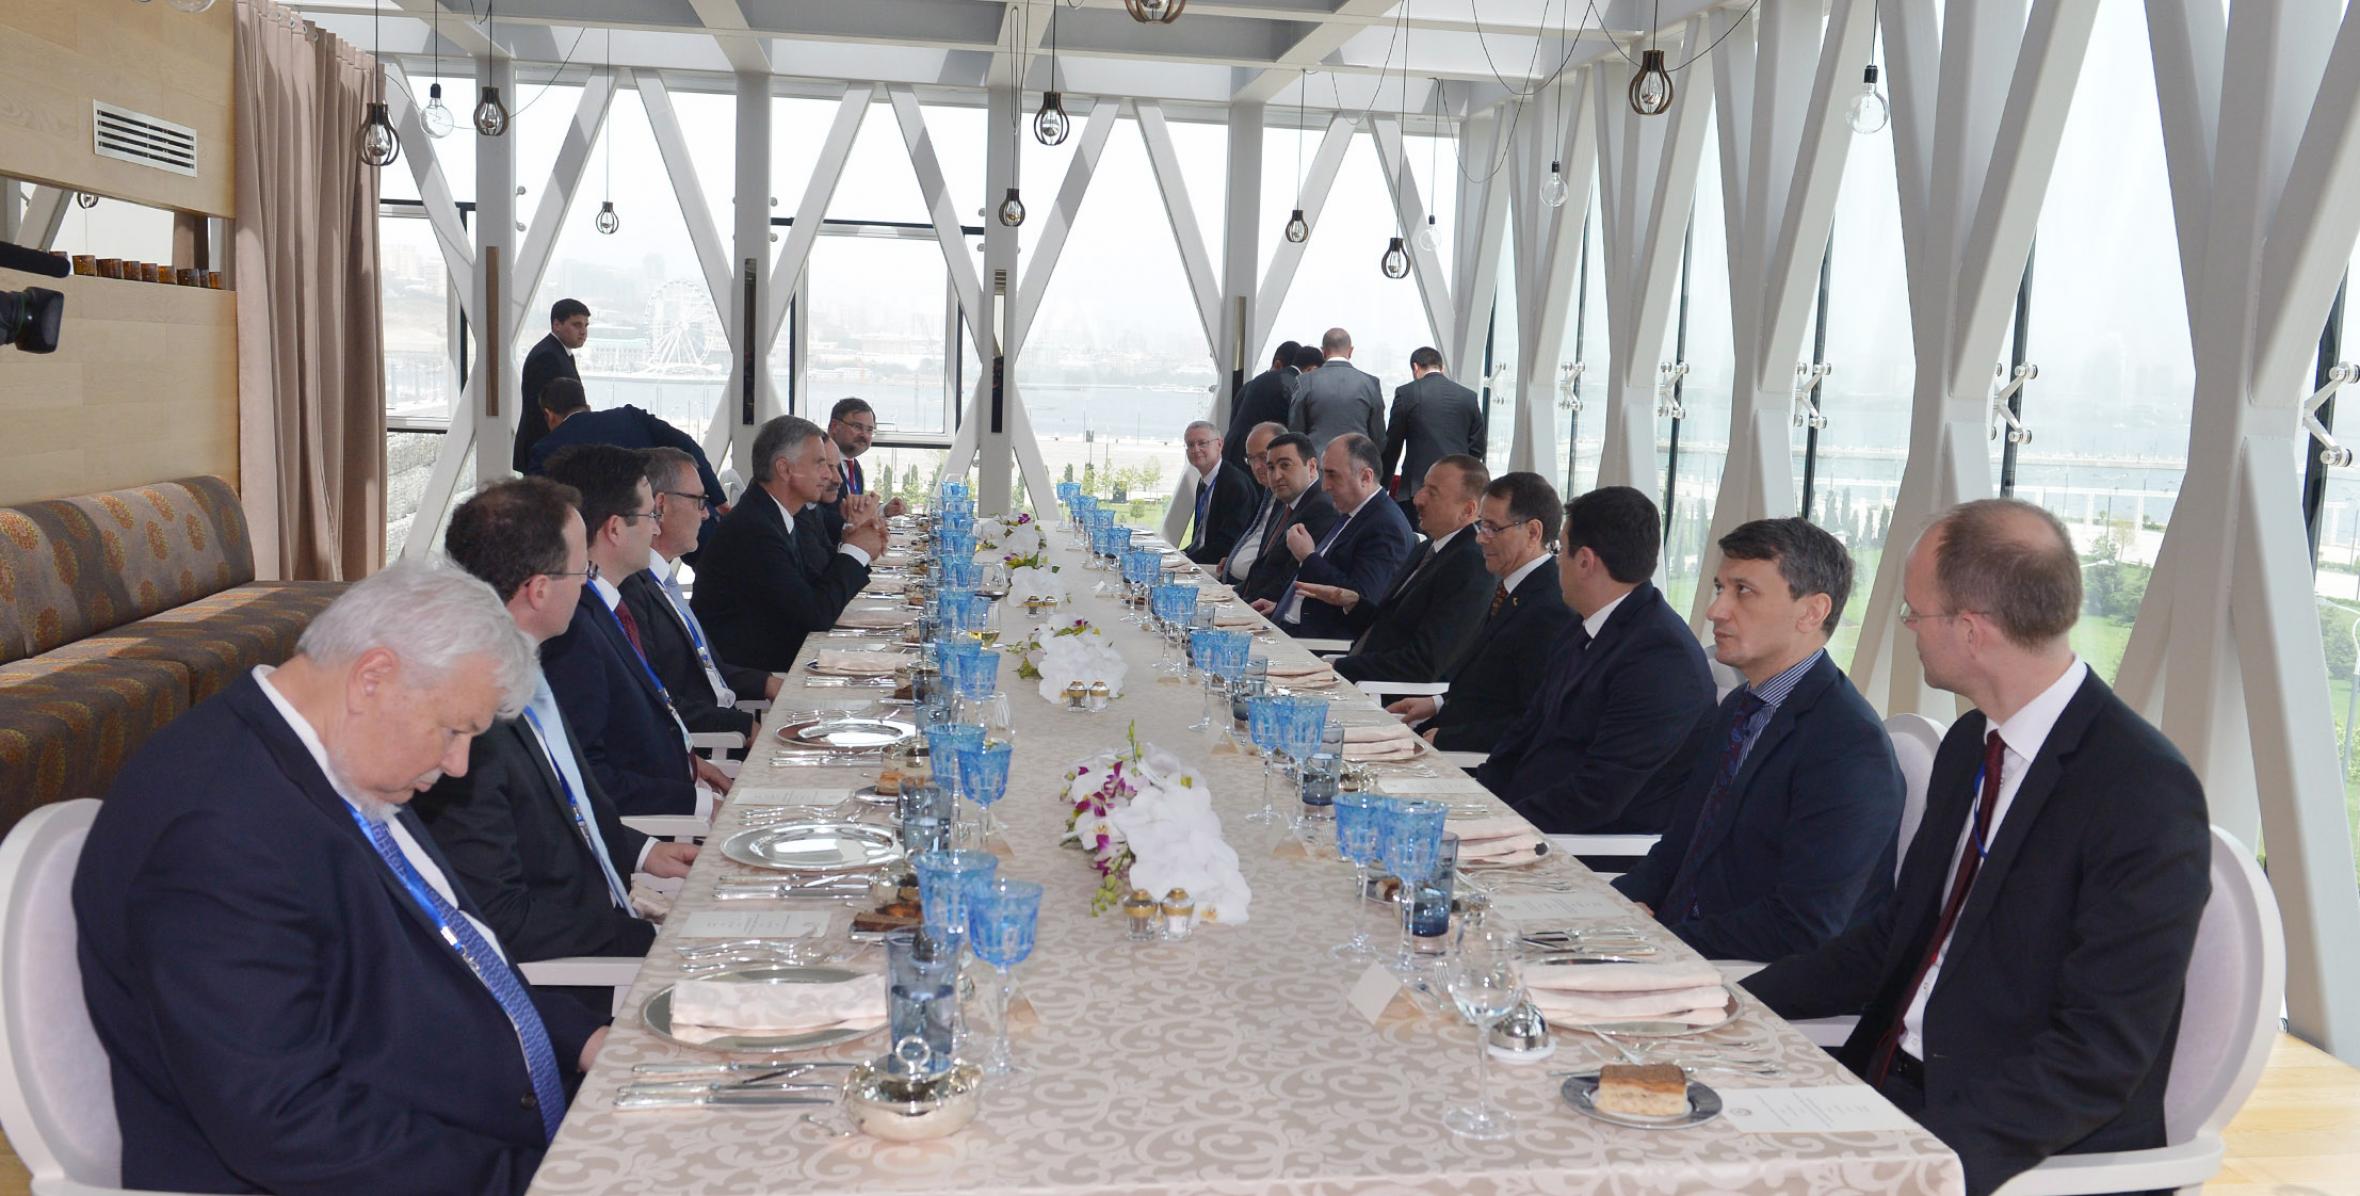 Official dinner reception was hosted on behalf of Ilham Aliyev in honor of President of the Swiss Confederation Didier Burkhalter